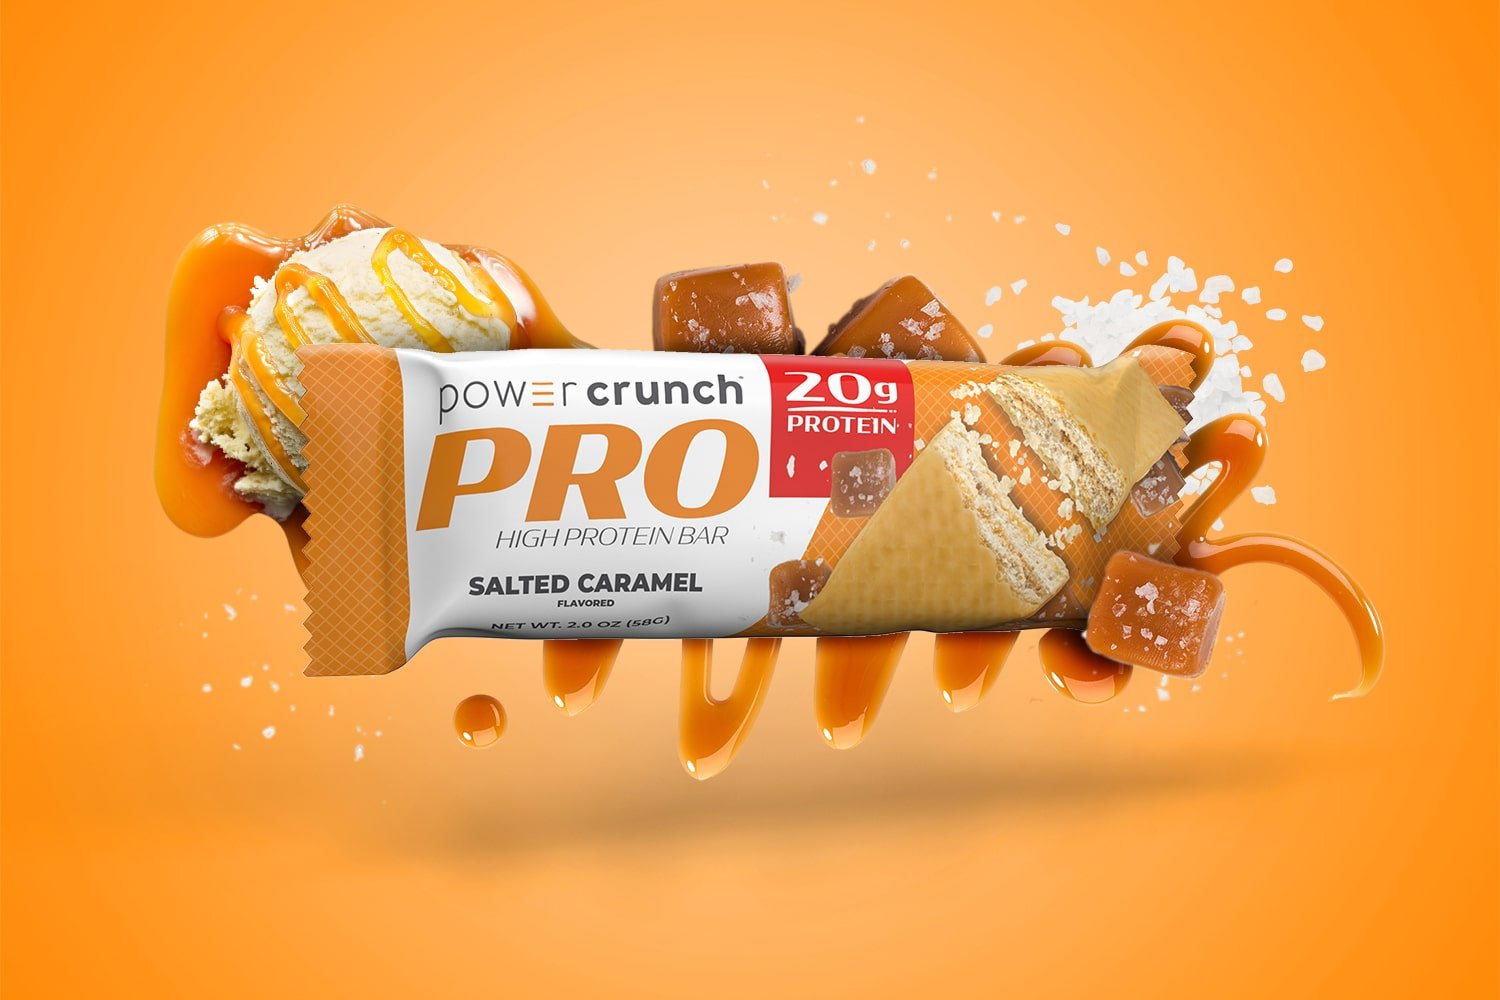 PRO Salted Caramel 20g protein bars pictured with Salted Caramel flavor explosion